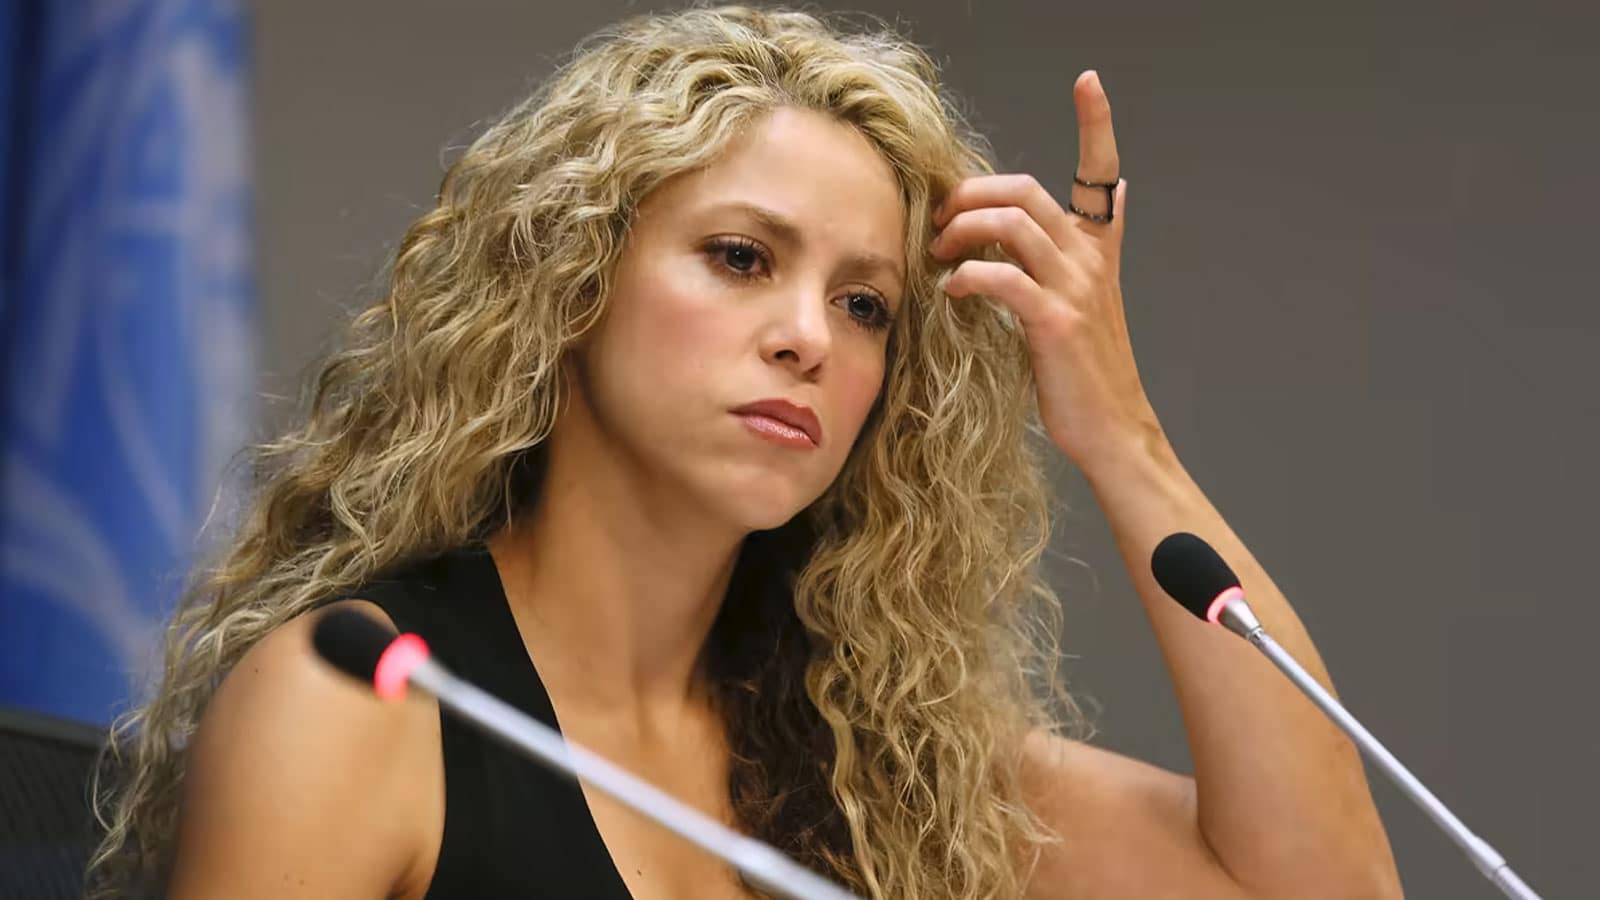 Spanish court orders Shakira to stand trial in tax fraud case